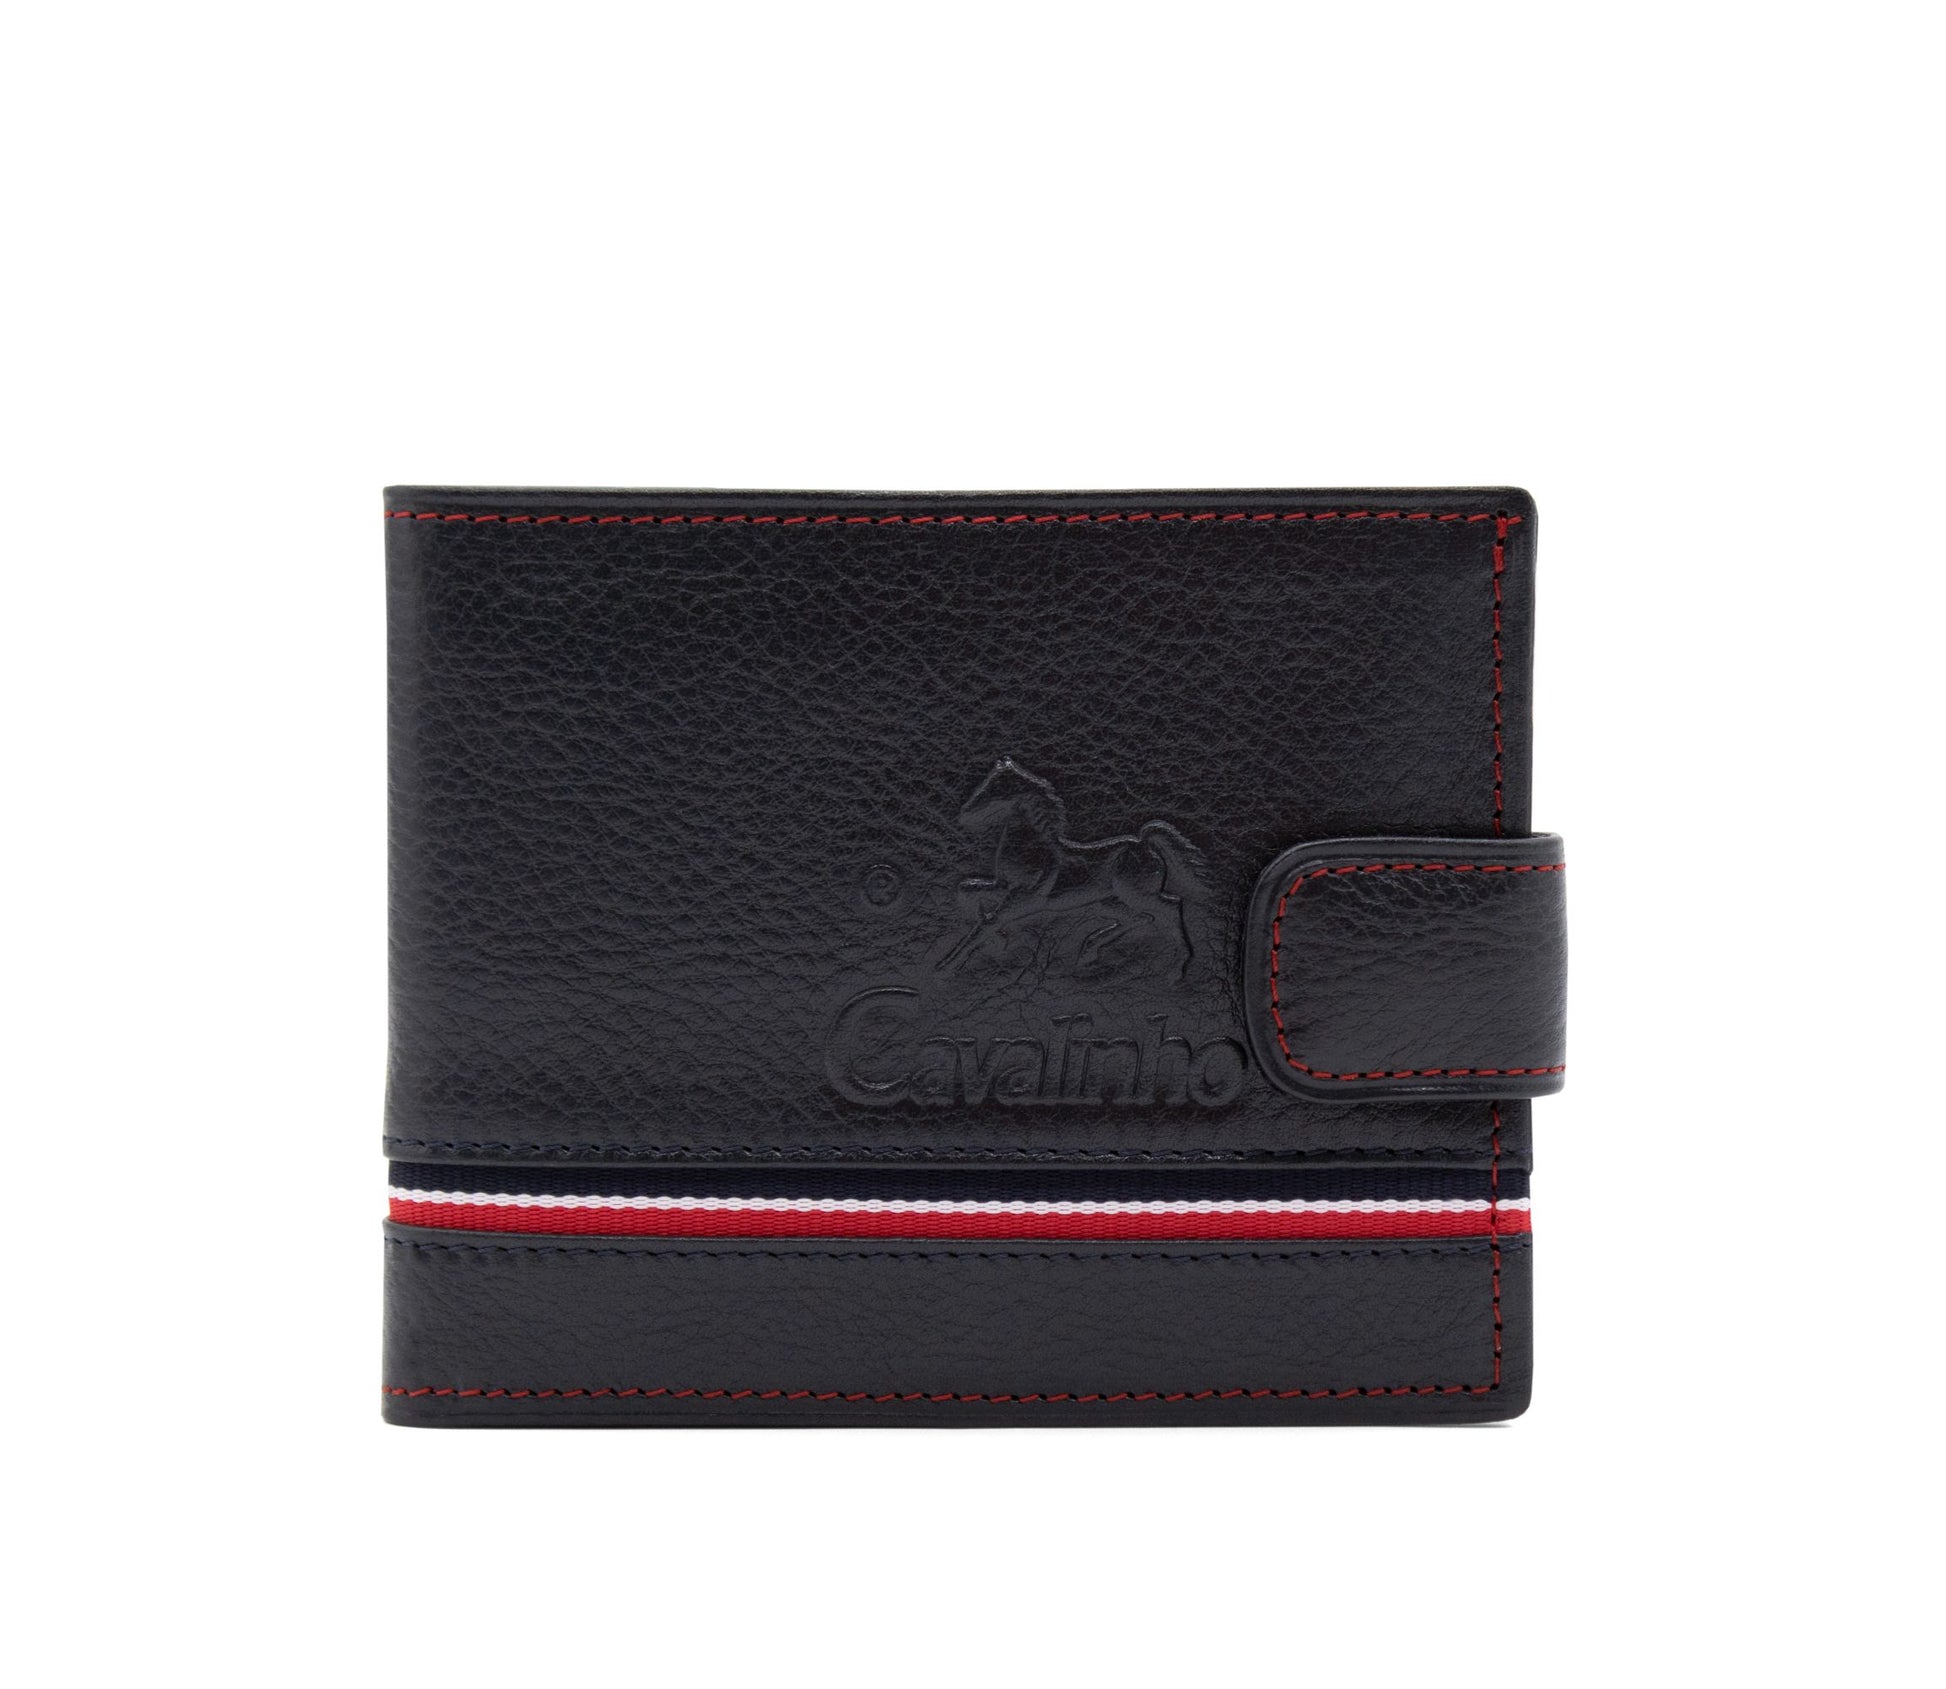 Cavalinho The Sailor Trifold Leather Wallet - Navy - 28150503.22_1